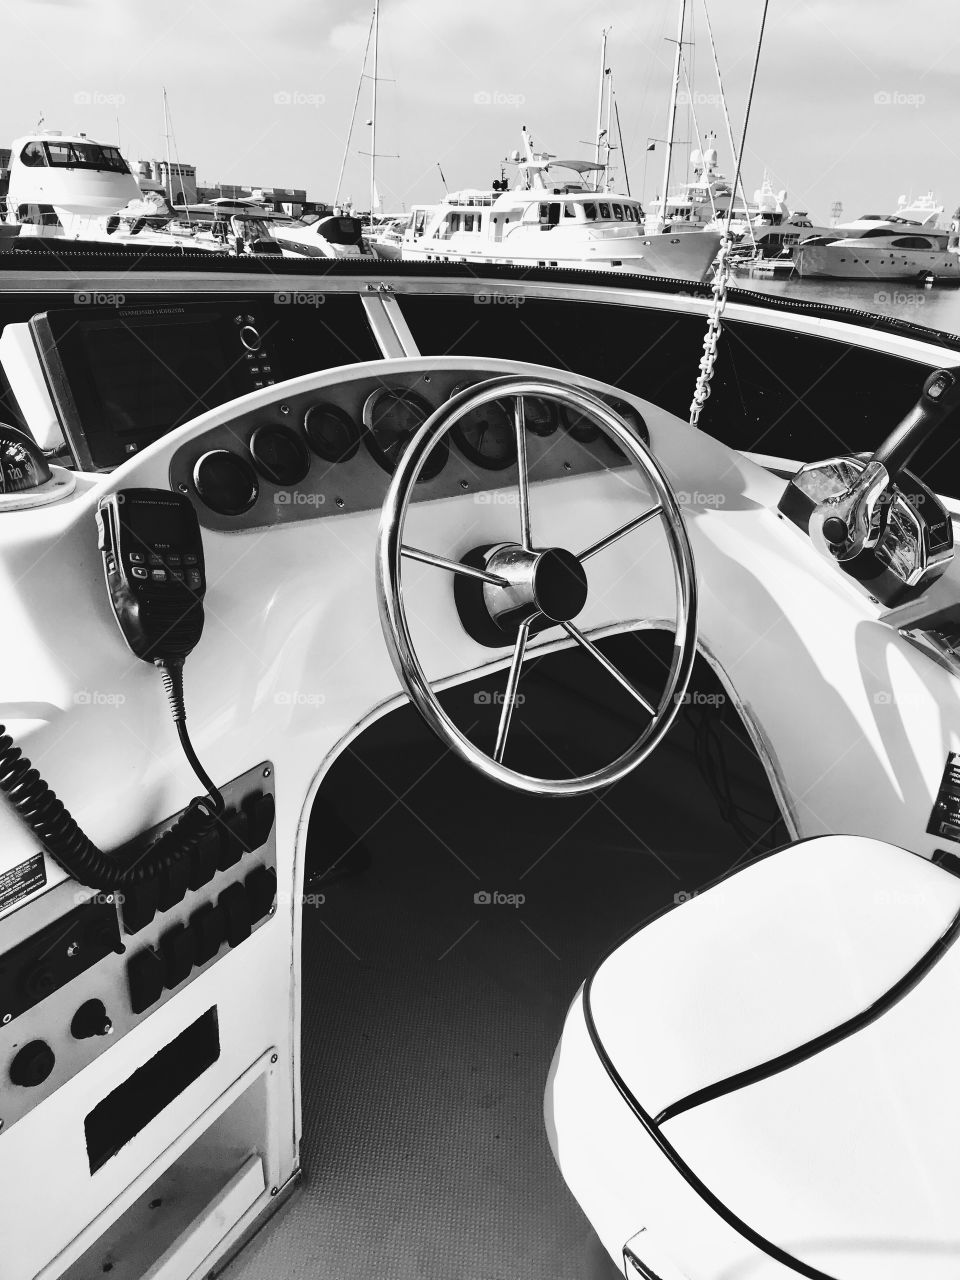 Seaport, yacht, boat, steering wheel, black and white photo